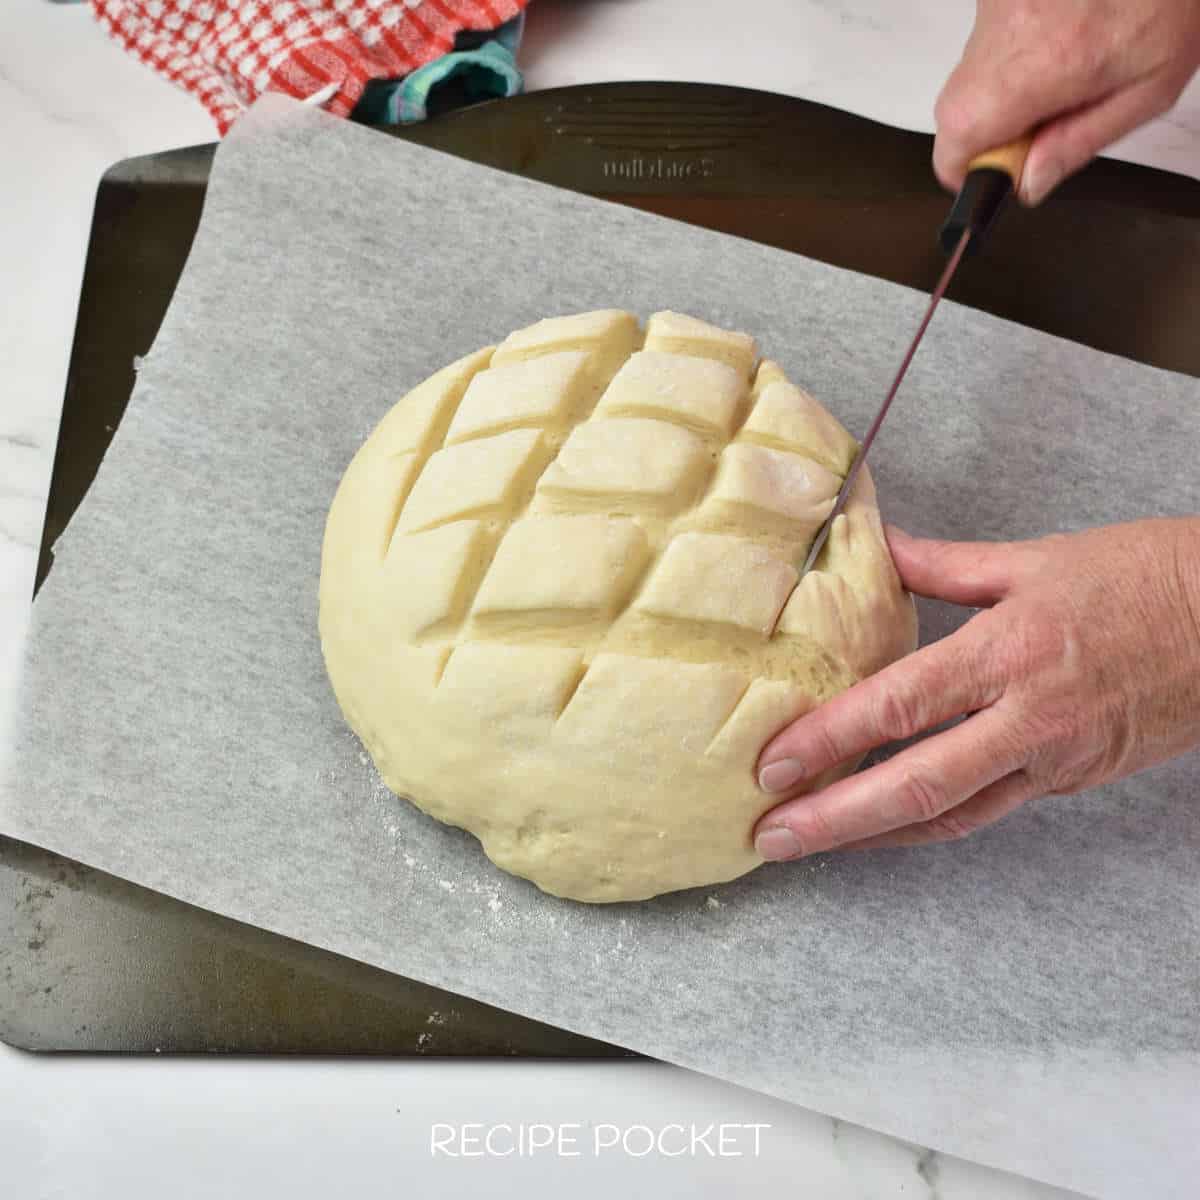 Bread dough being scored with a knife.